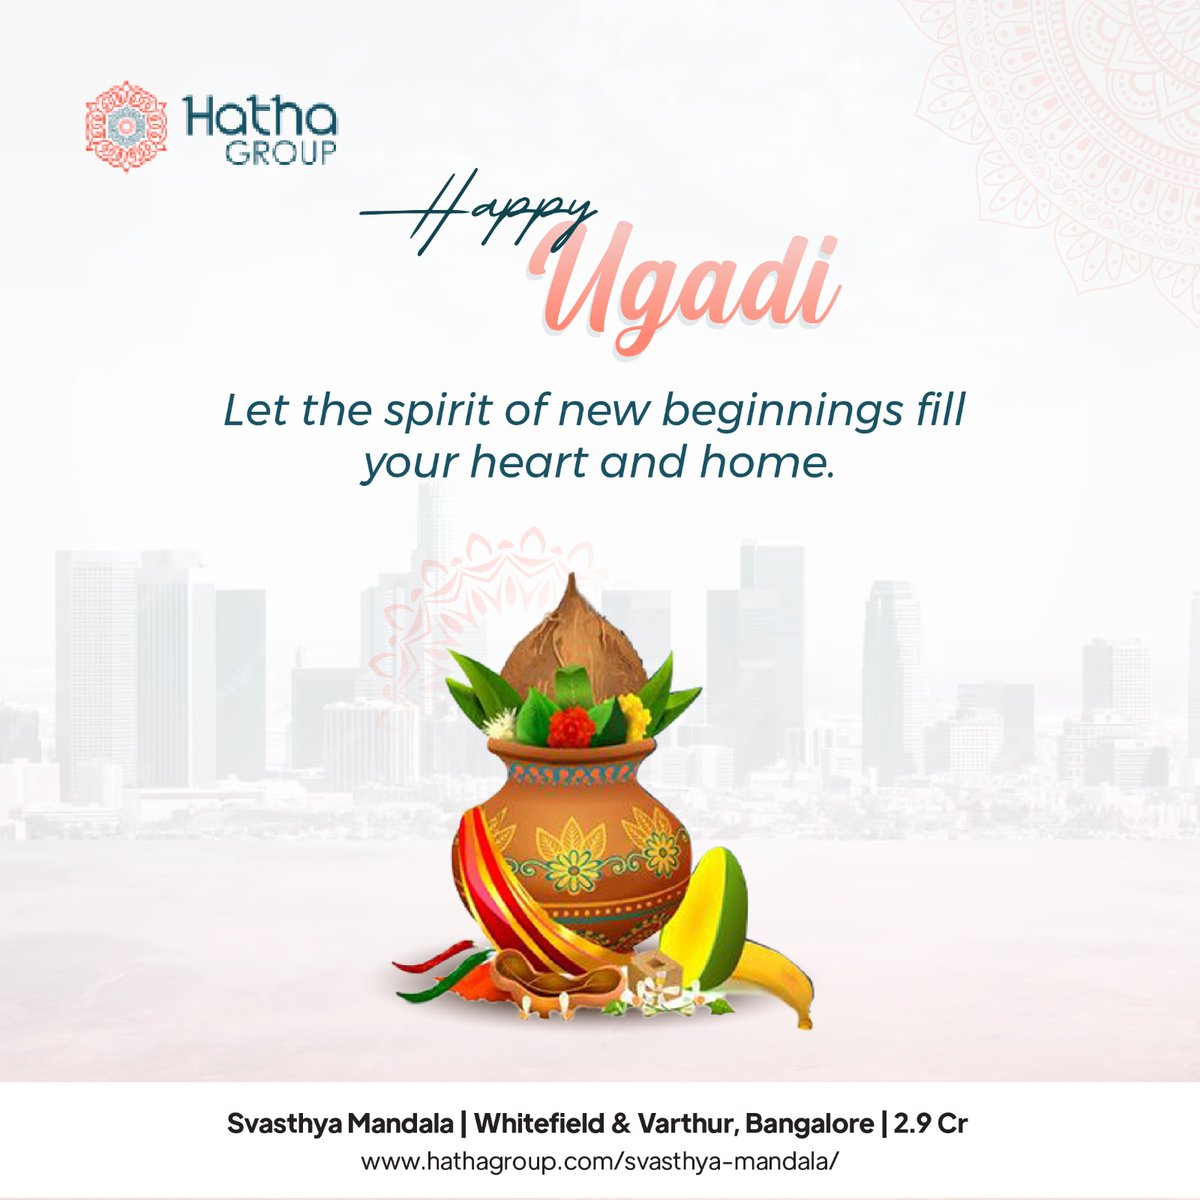 May this Ugadi festival balance out the sour and sweet moments in your life. Wishing you a prosperous year ahead. 

#HappyUgadi #UgadiCelebration #NewYear #UgadiGreetings #HathaGroup